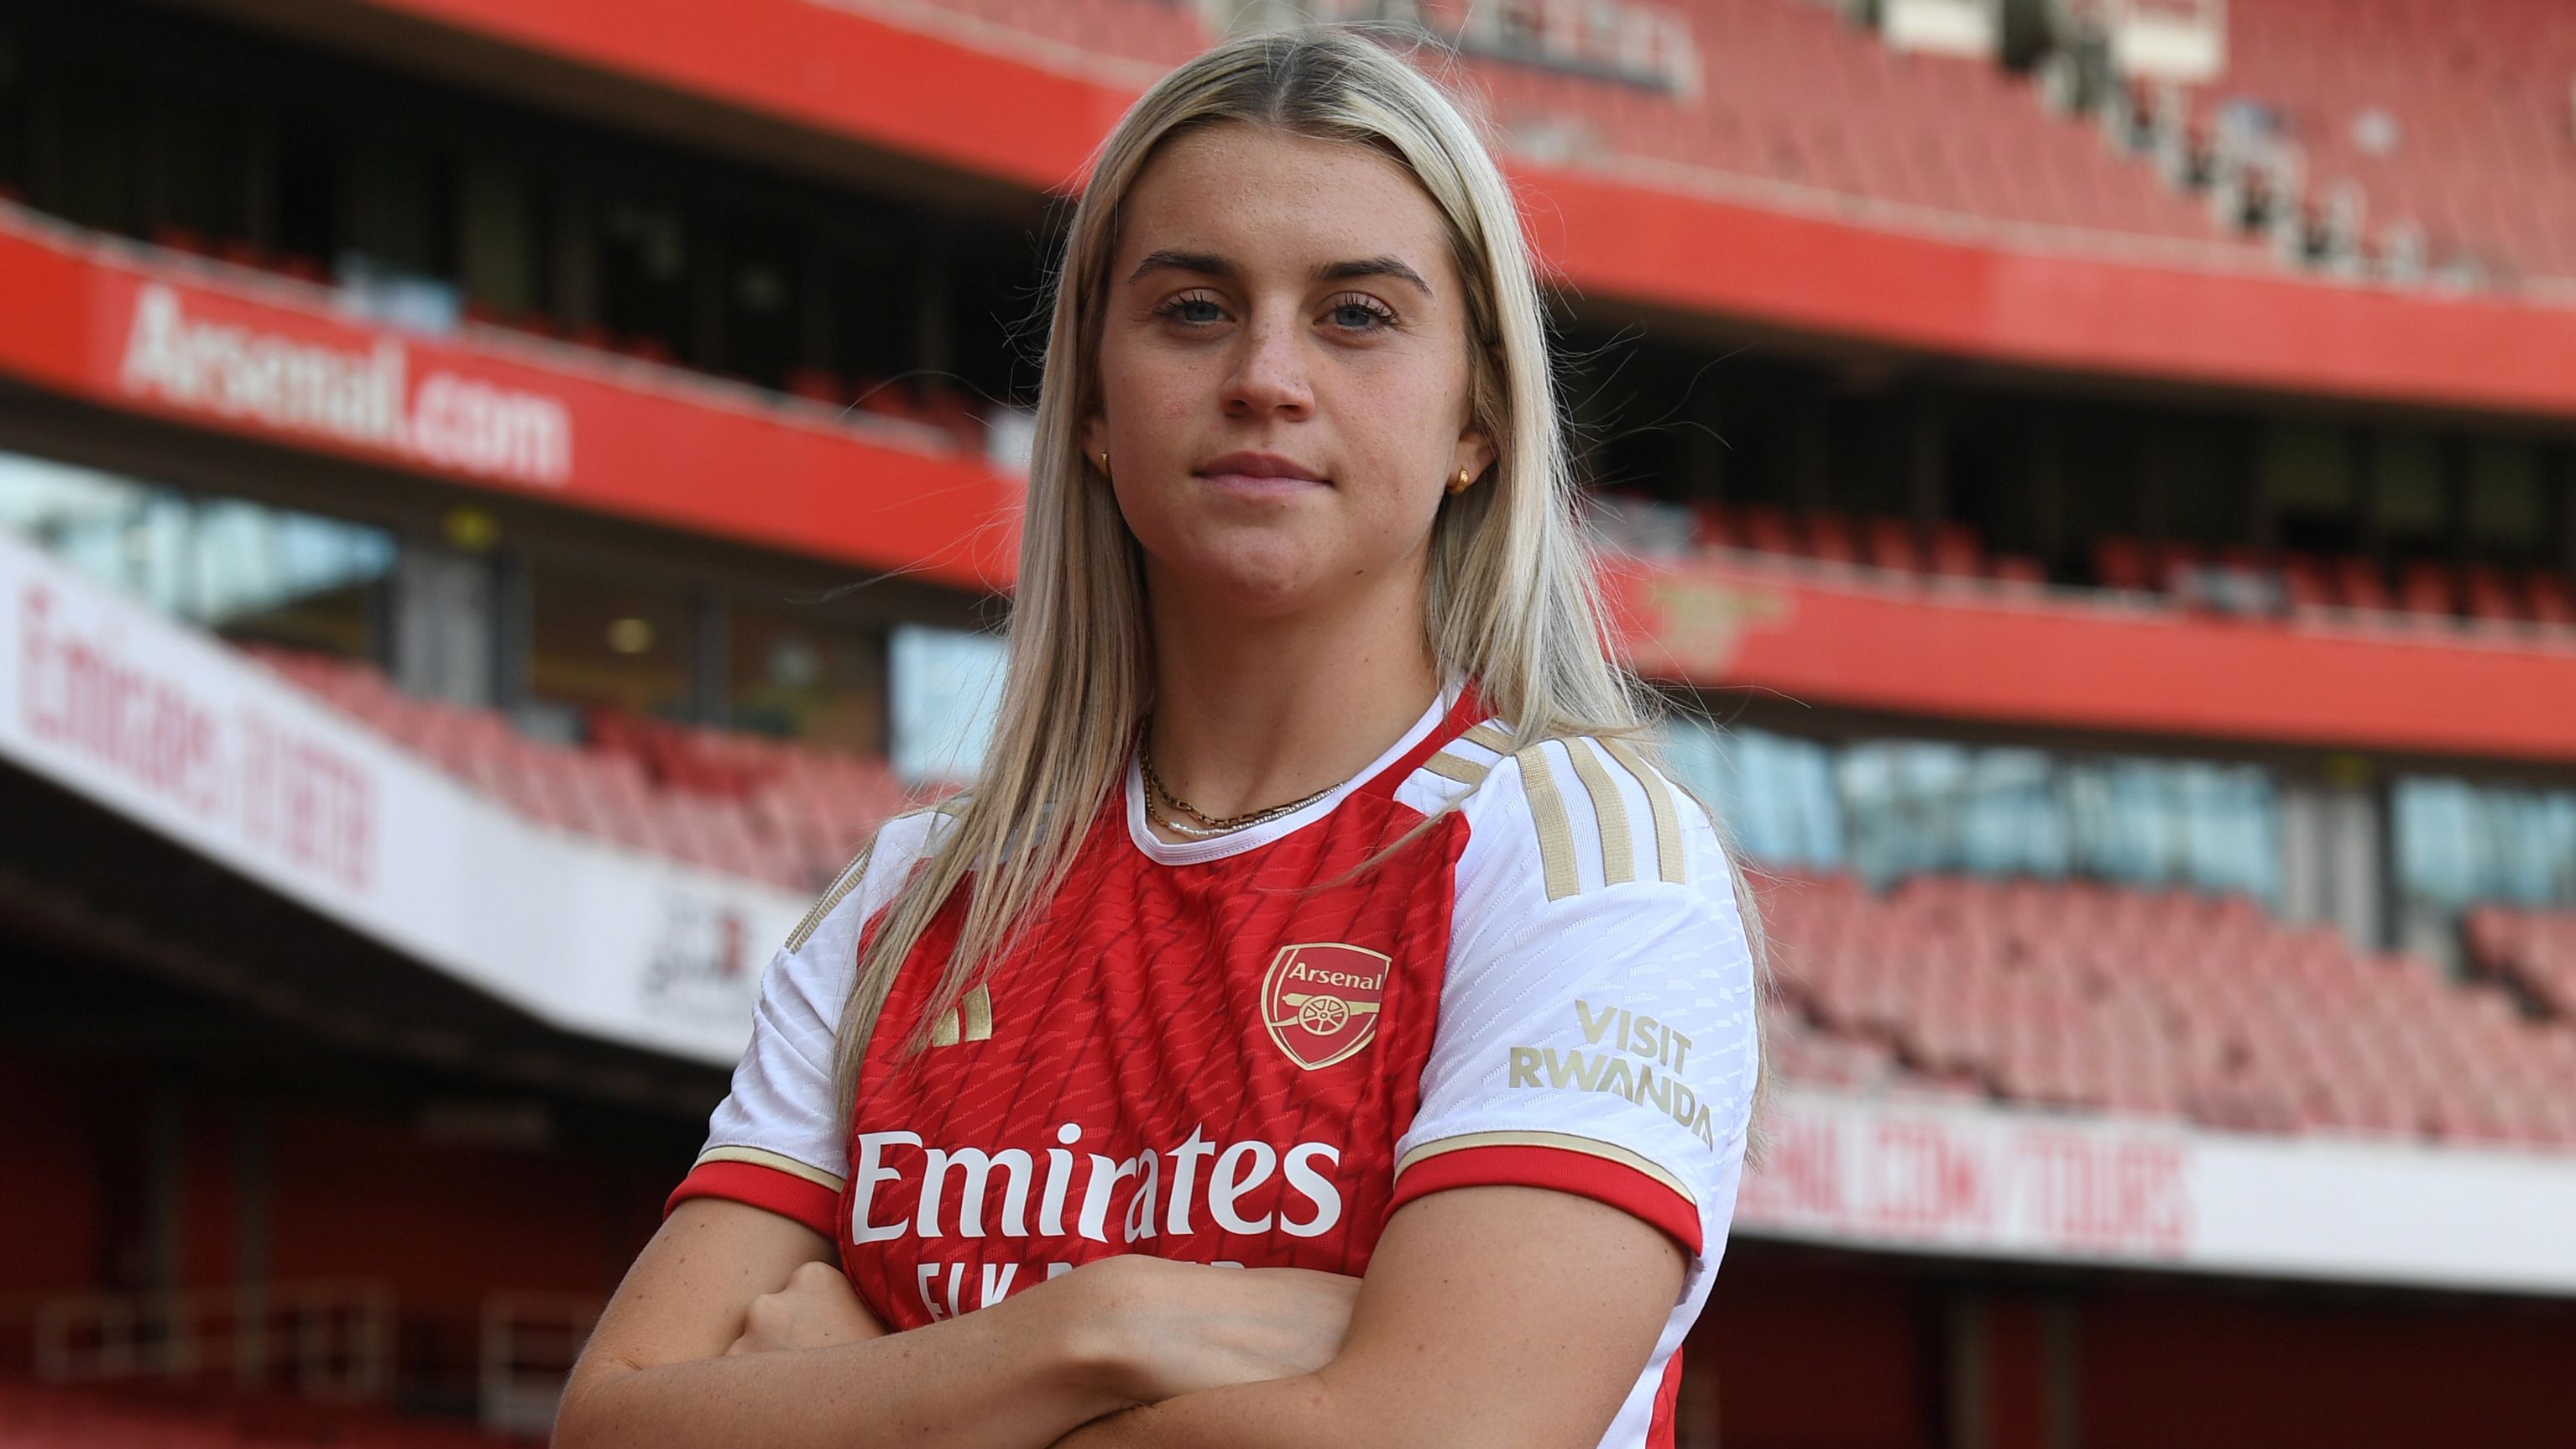 England forward Alessia Russo joins Arsenal on free transfer | LiveScore